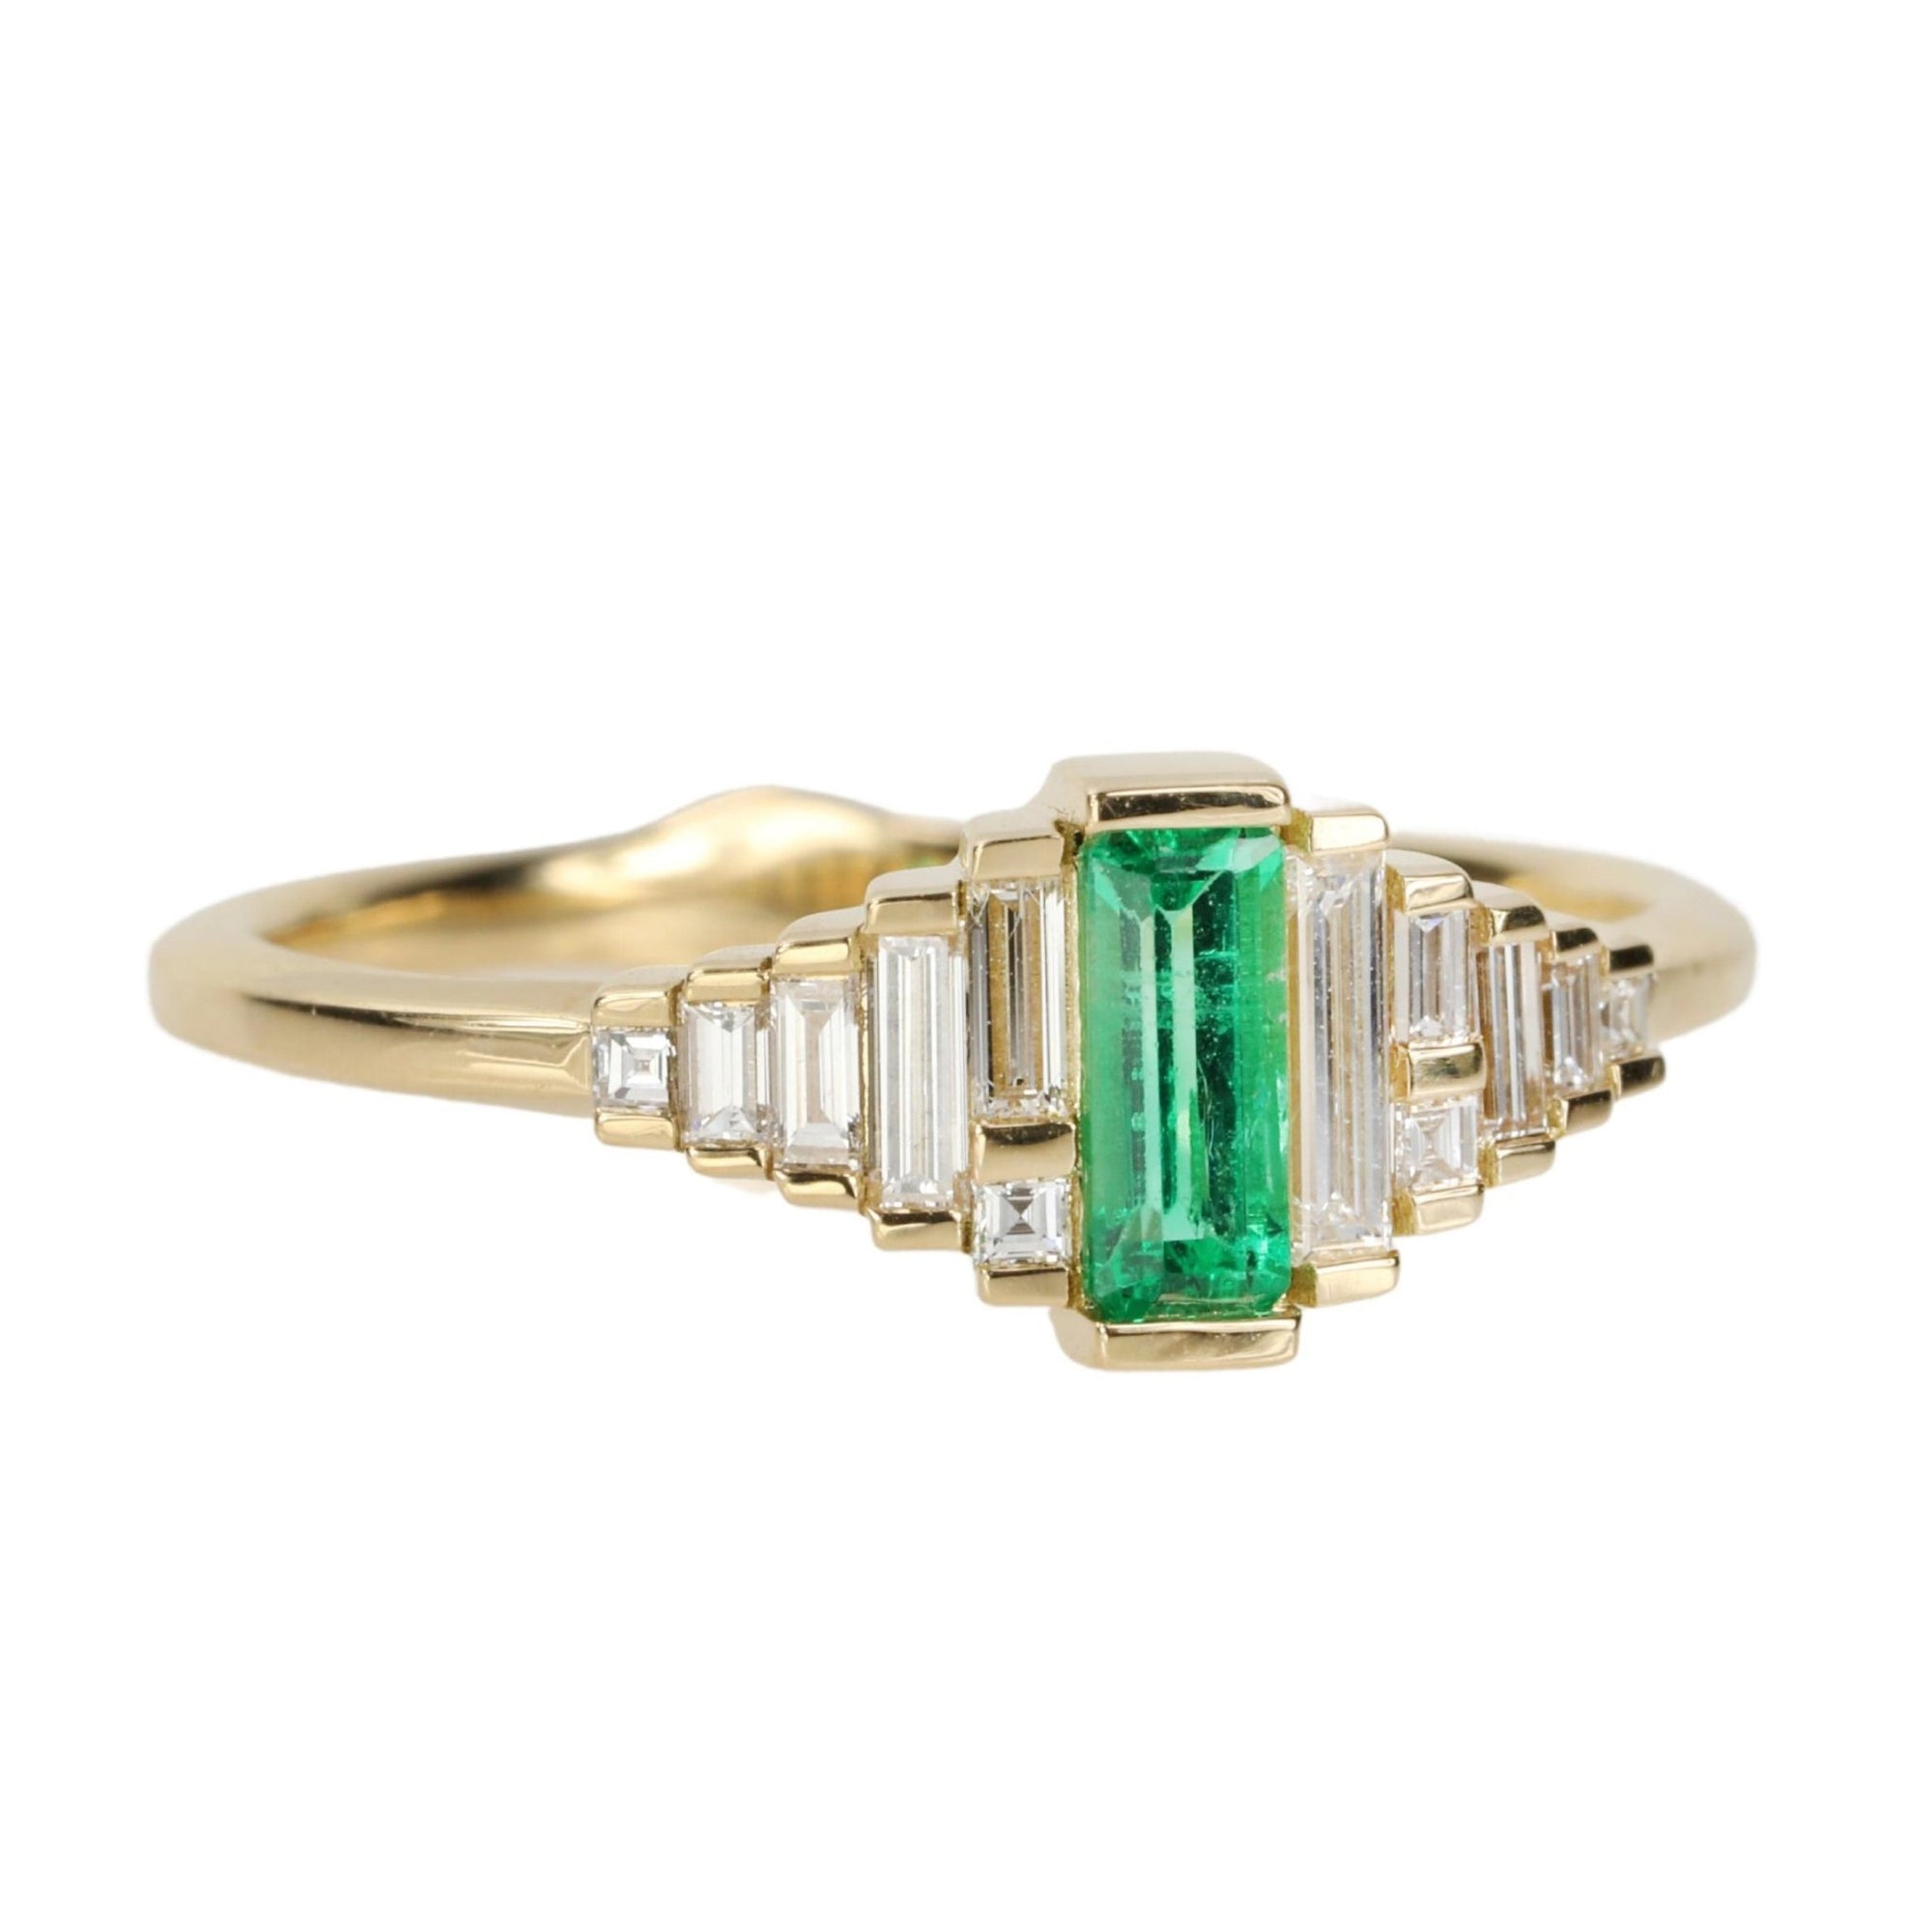 Artemer Emerald Ring with Graduated Needle Baguette Diamonds